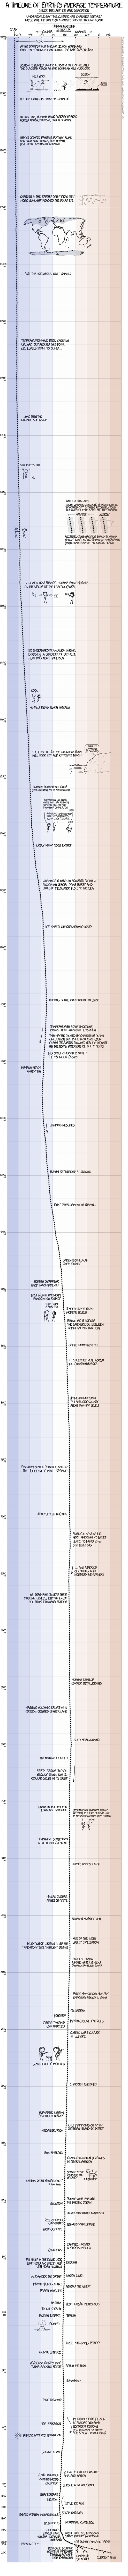 XKCD Timeline of Earth's Average Temperature